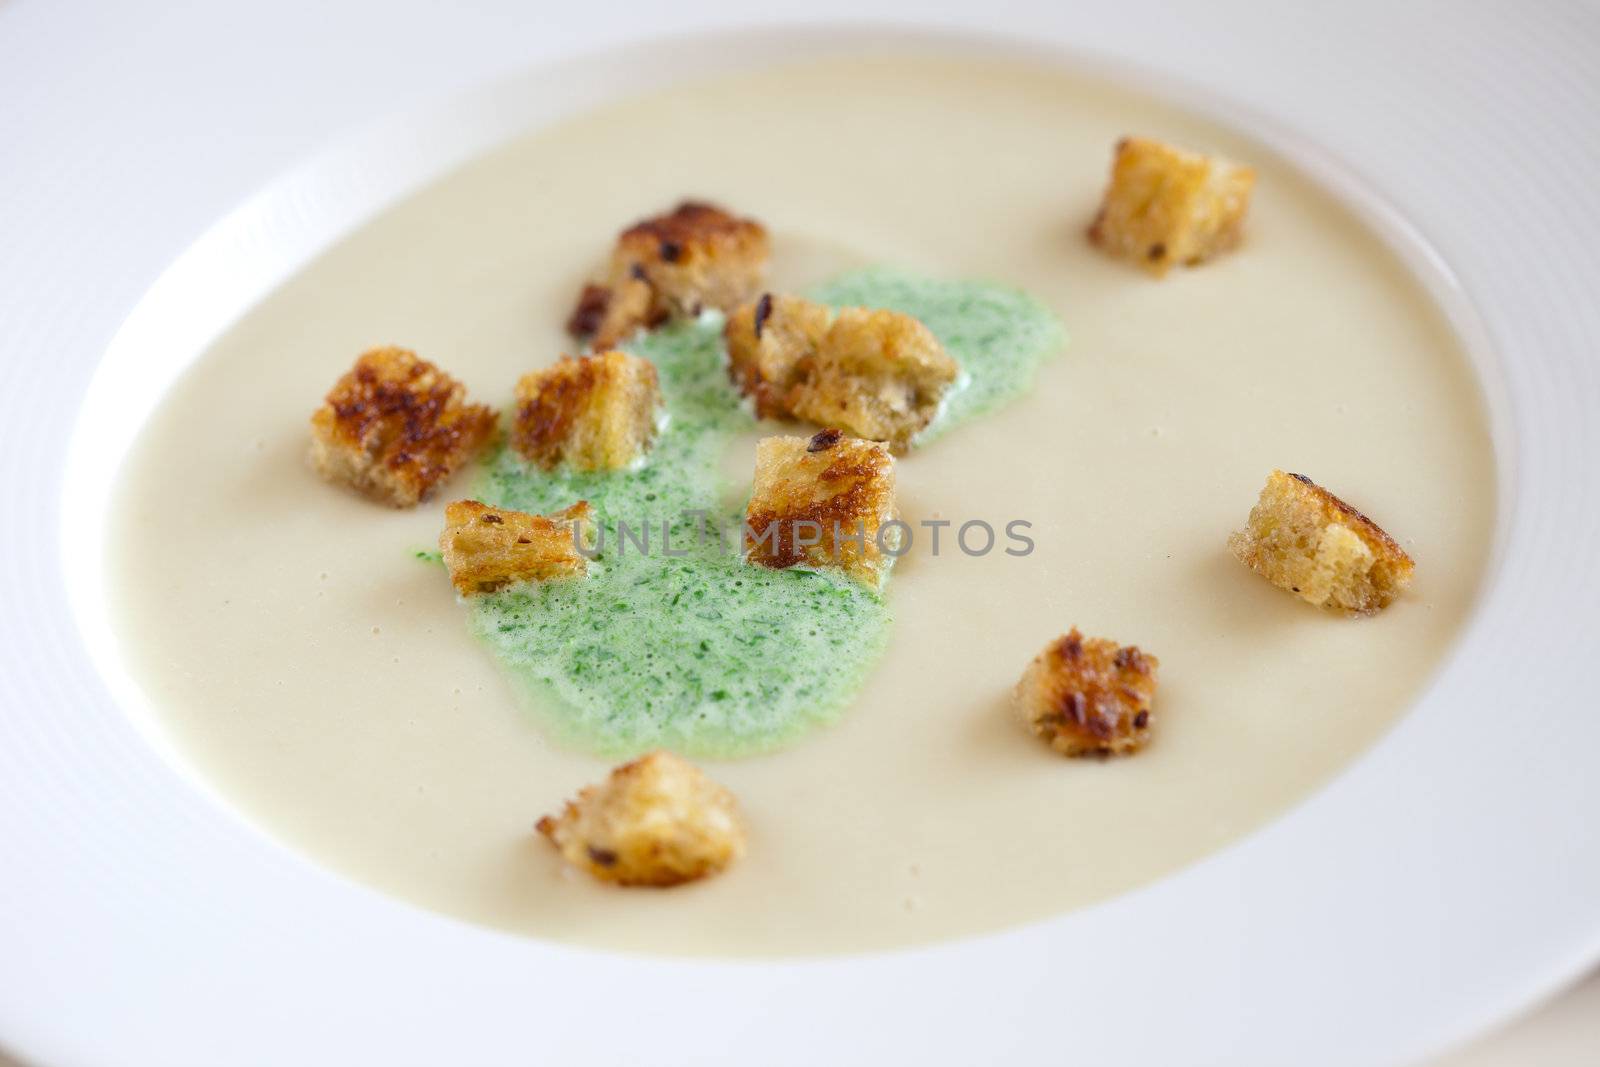 Delicious soup with parsnips and parsley cream on top